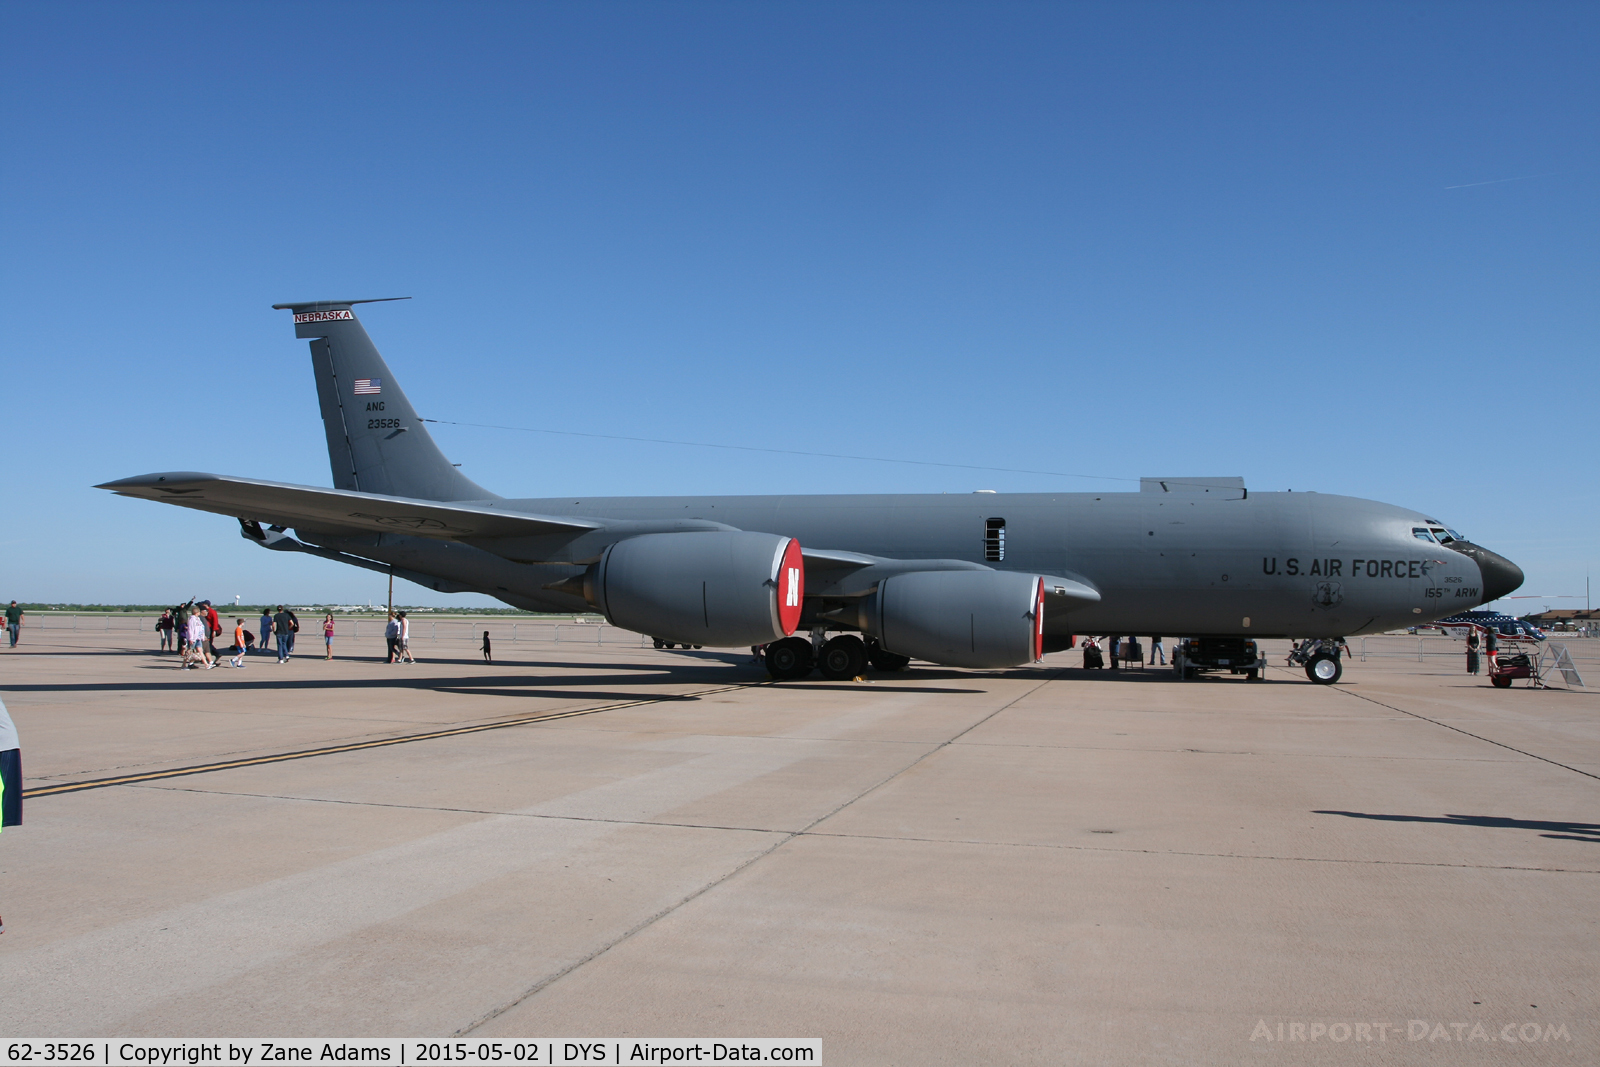 62-3526, 1962 Boeing KC-135R Stratotanker C/N 18509, At the 2014 Big Country Airshow - Dyess AFB, TX